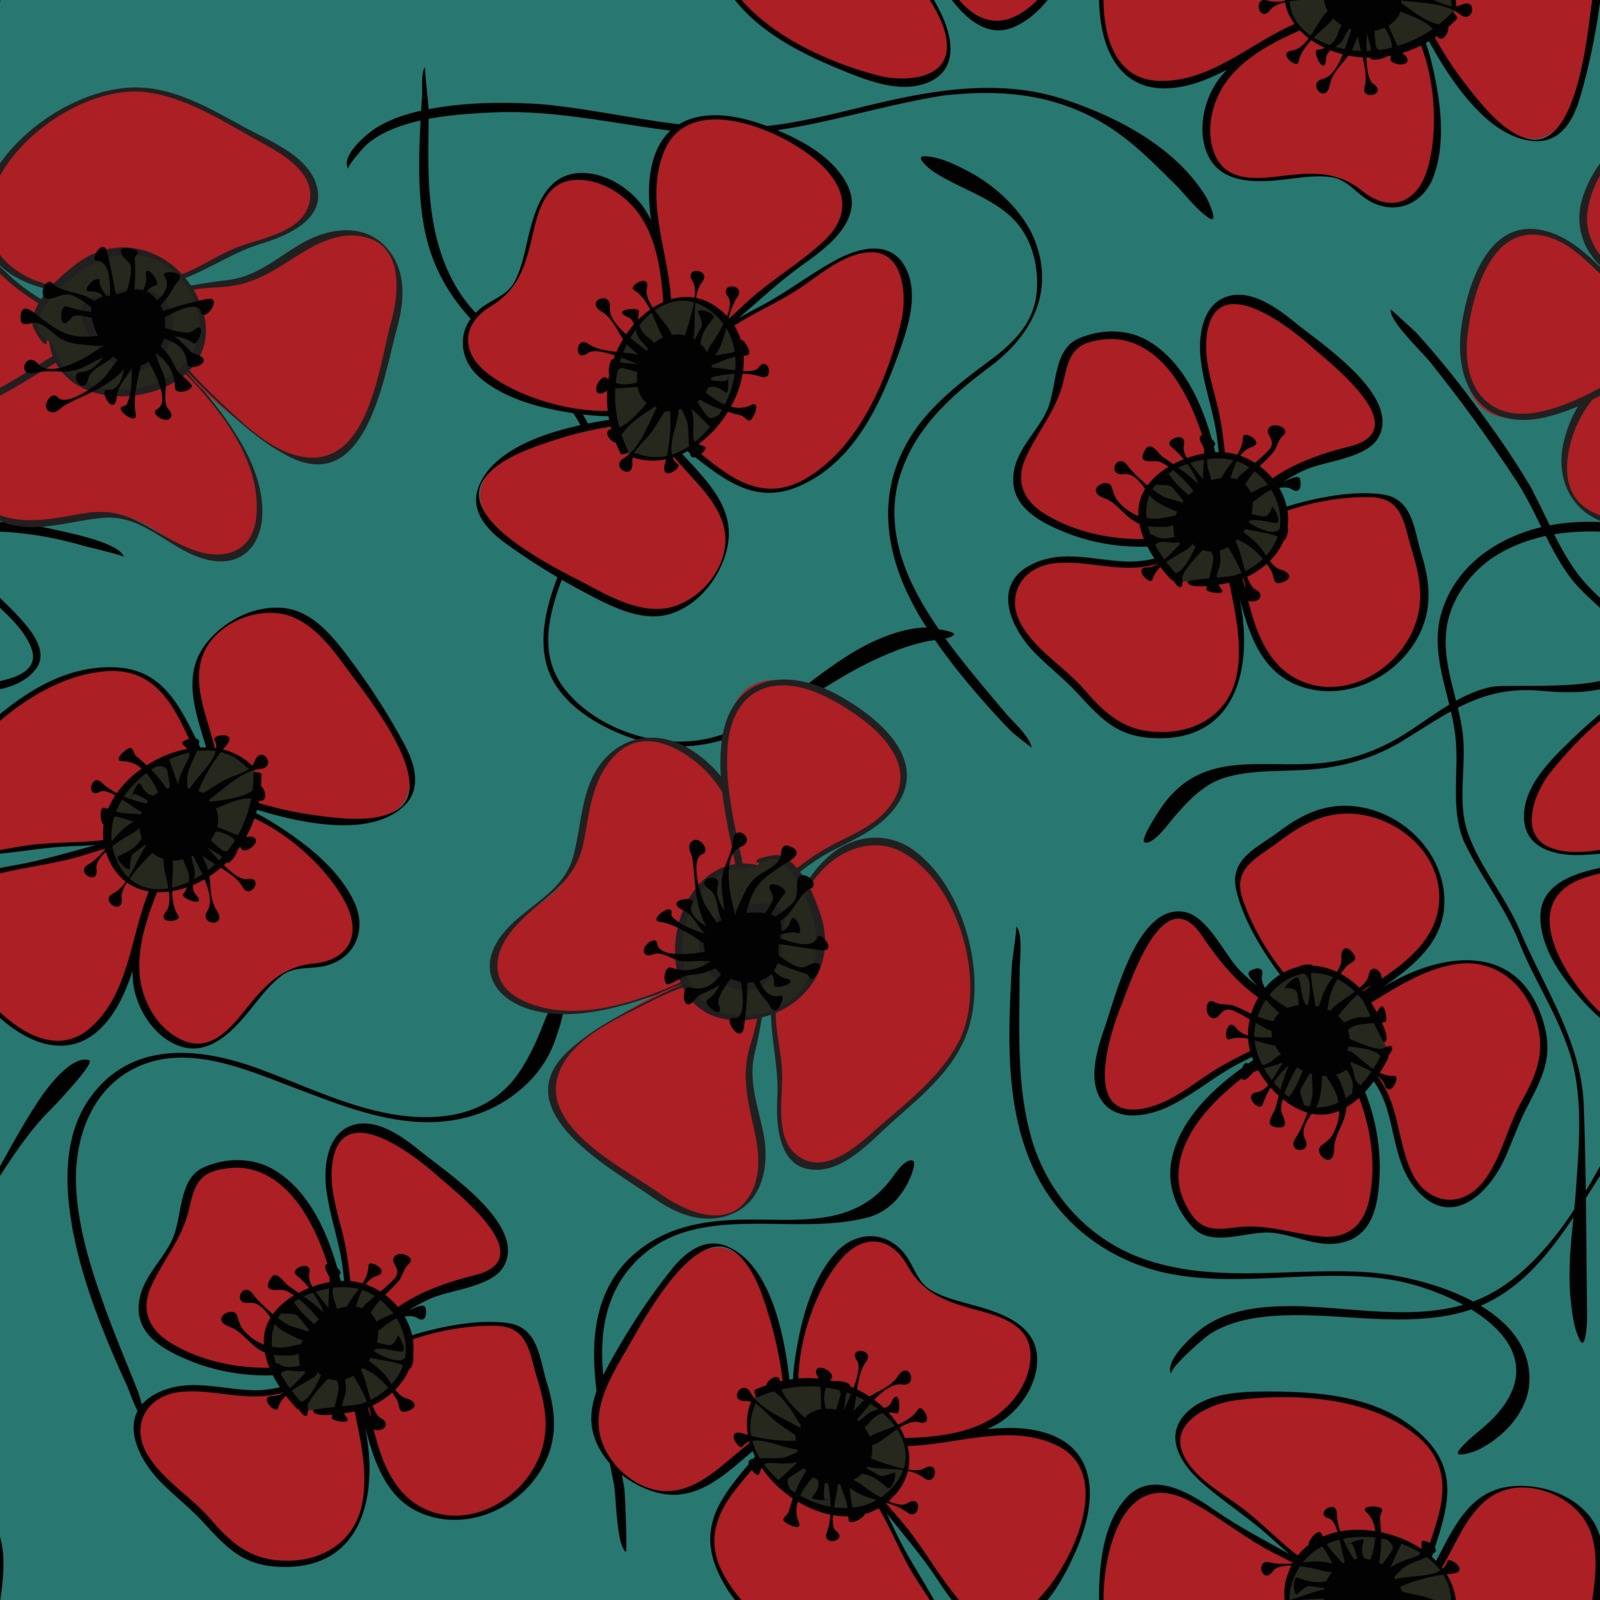 Red poppies  by Graffiti21